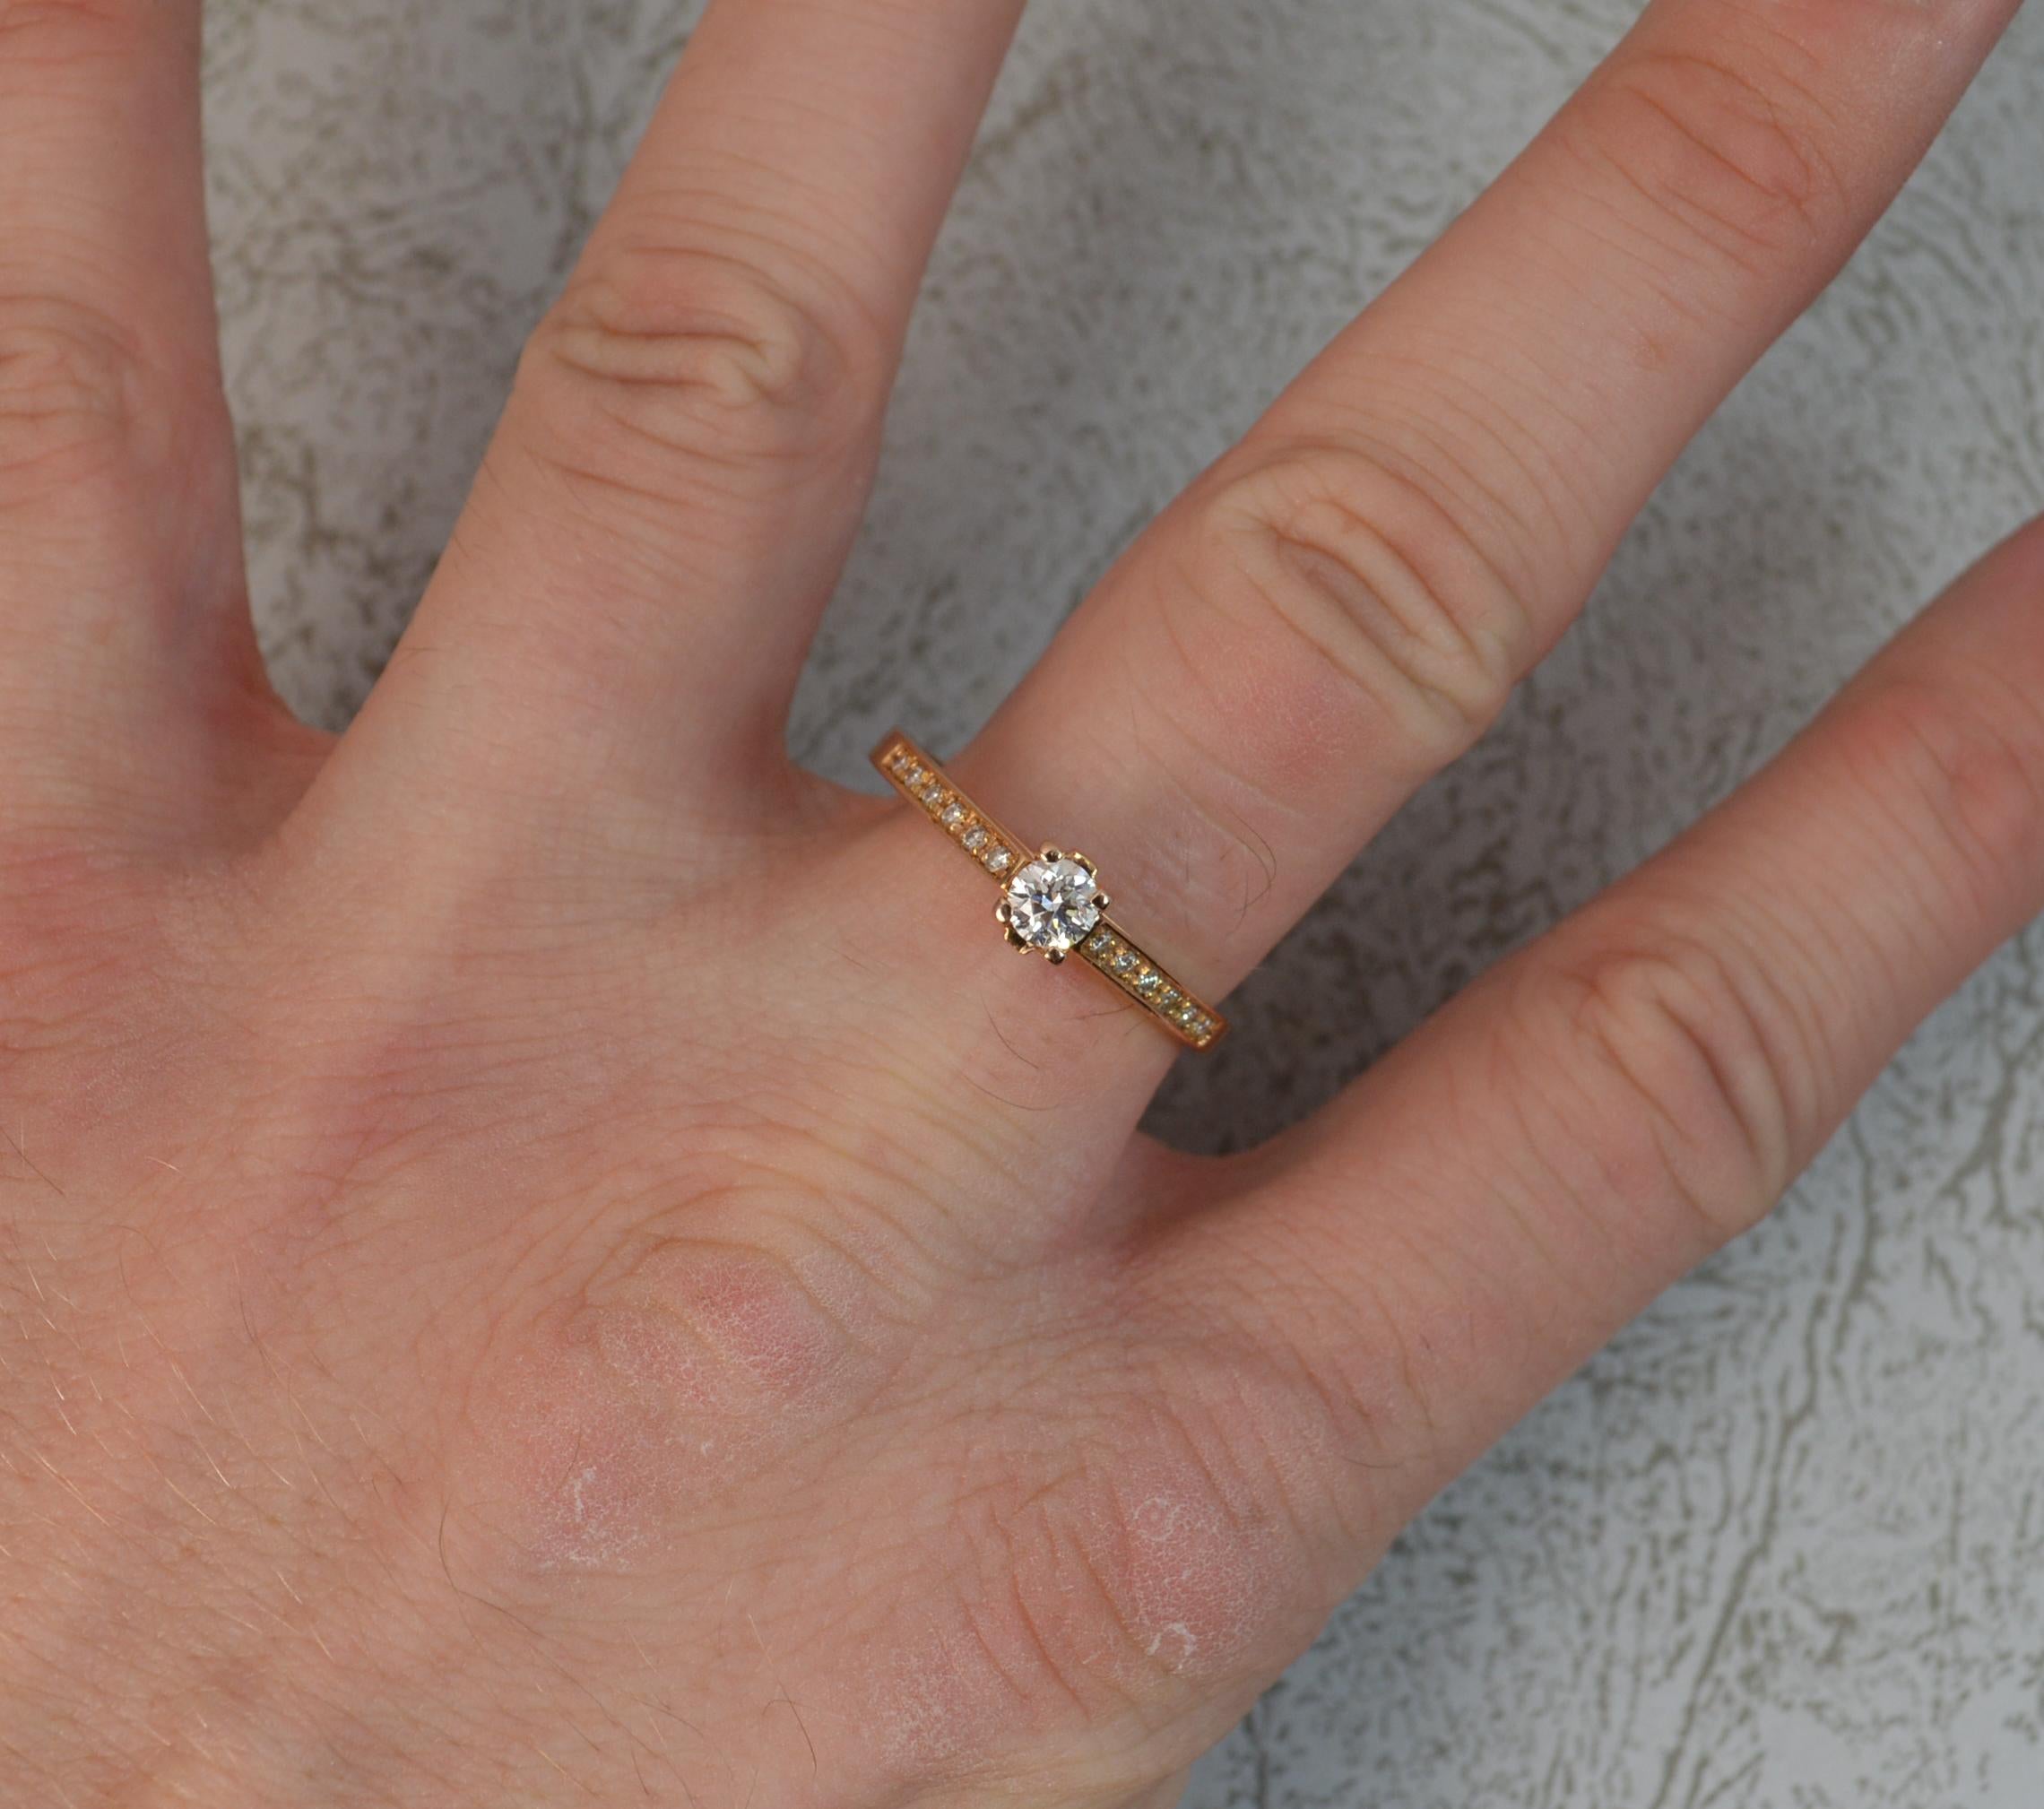 A superb 18ct Rose Gold and Diamond engagement ring.
Designed with a round brilliant cut diamond to centre in four claw setting, 0.28 carat approx. Vvs clarity, e-f colour. A very clean and sparkly diamond.
Set with a further six natural diamonds to